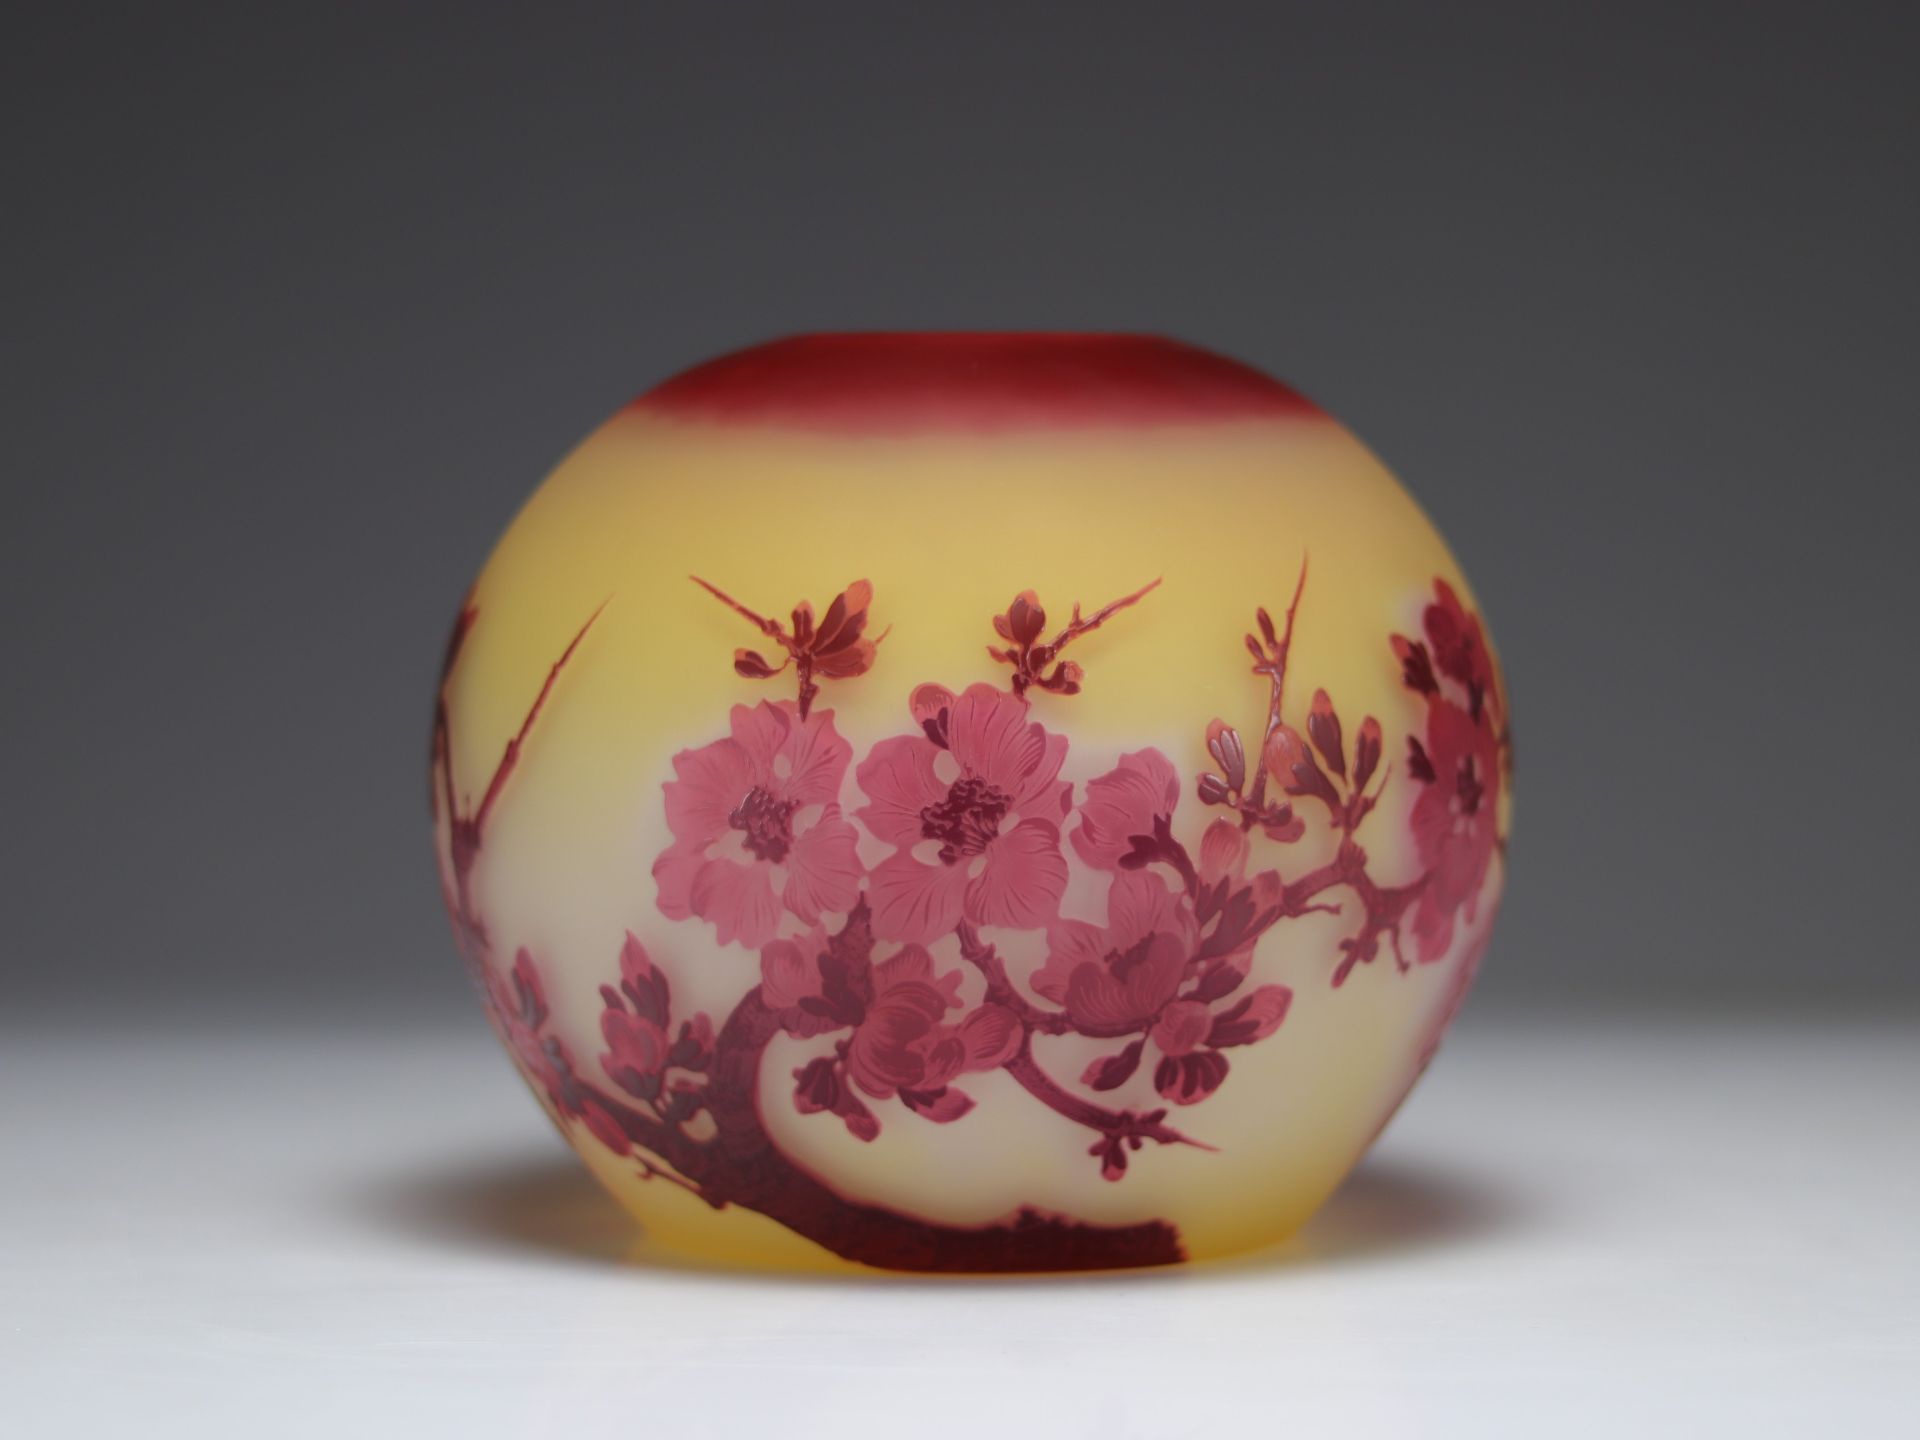 Emile Galle lamp base decorated with apple blossoms - Image 3 of 4